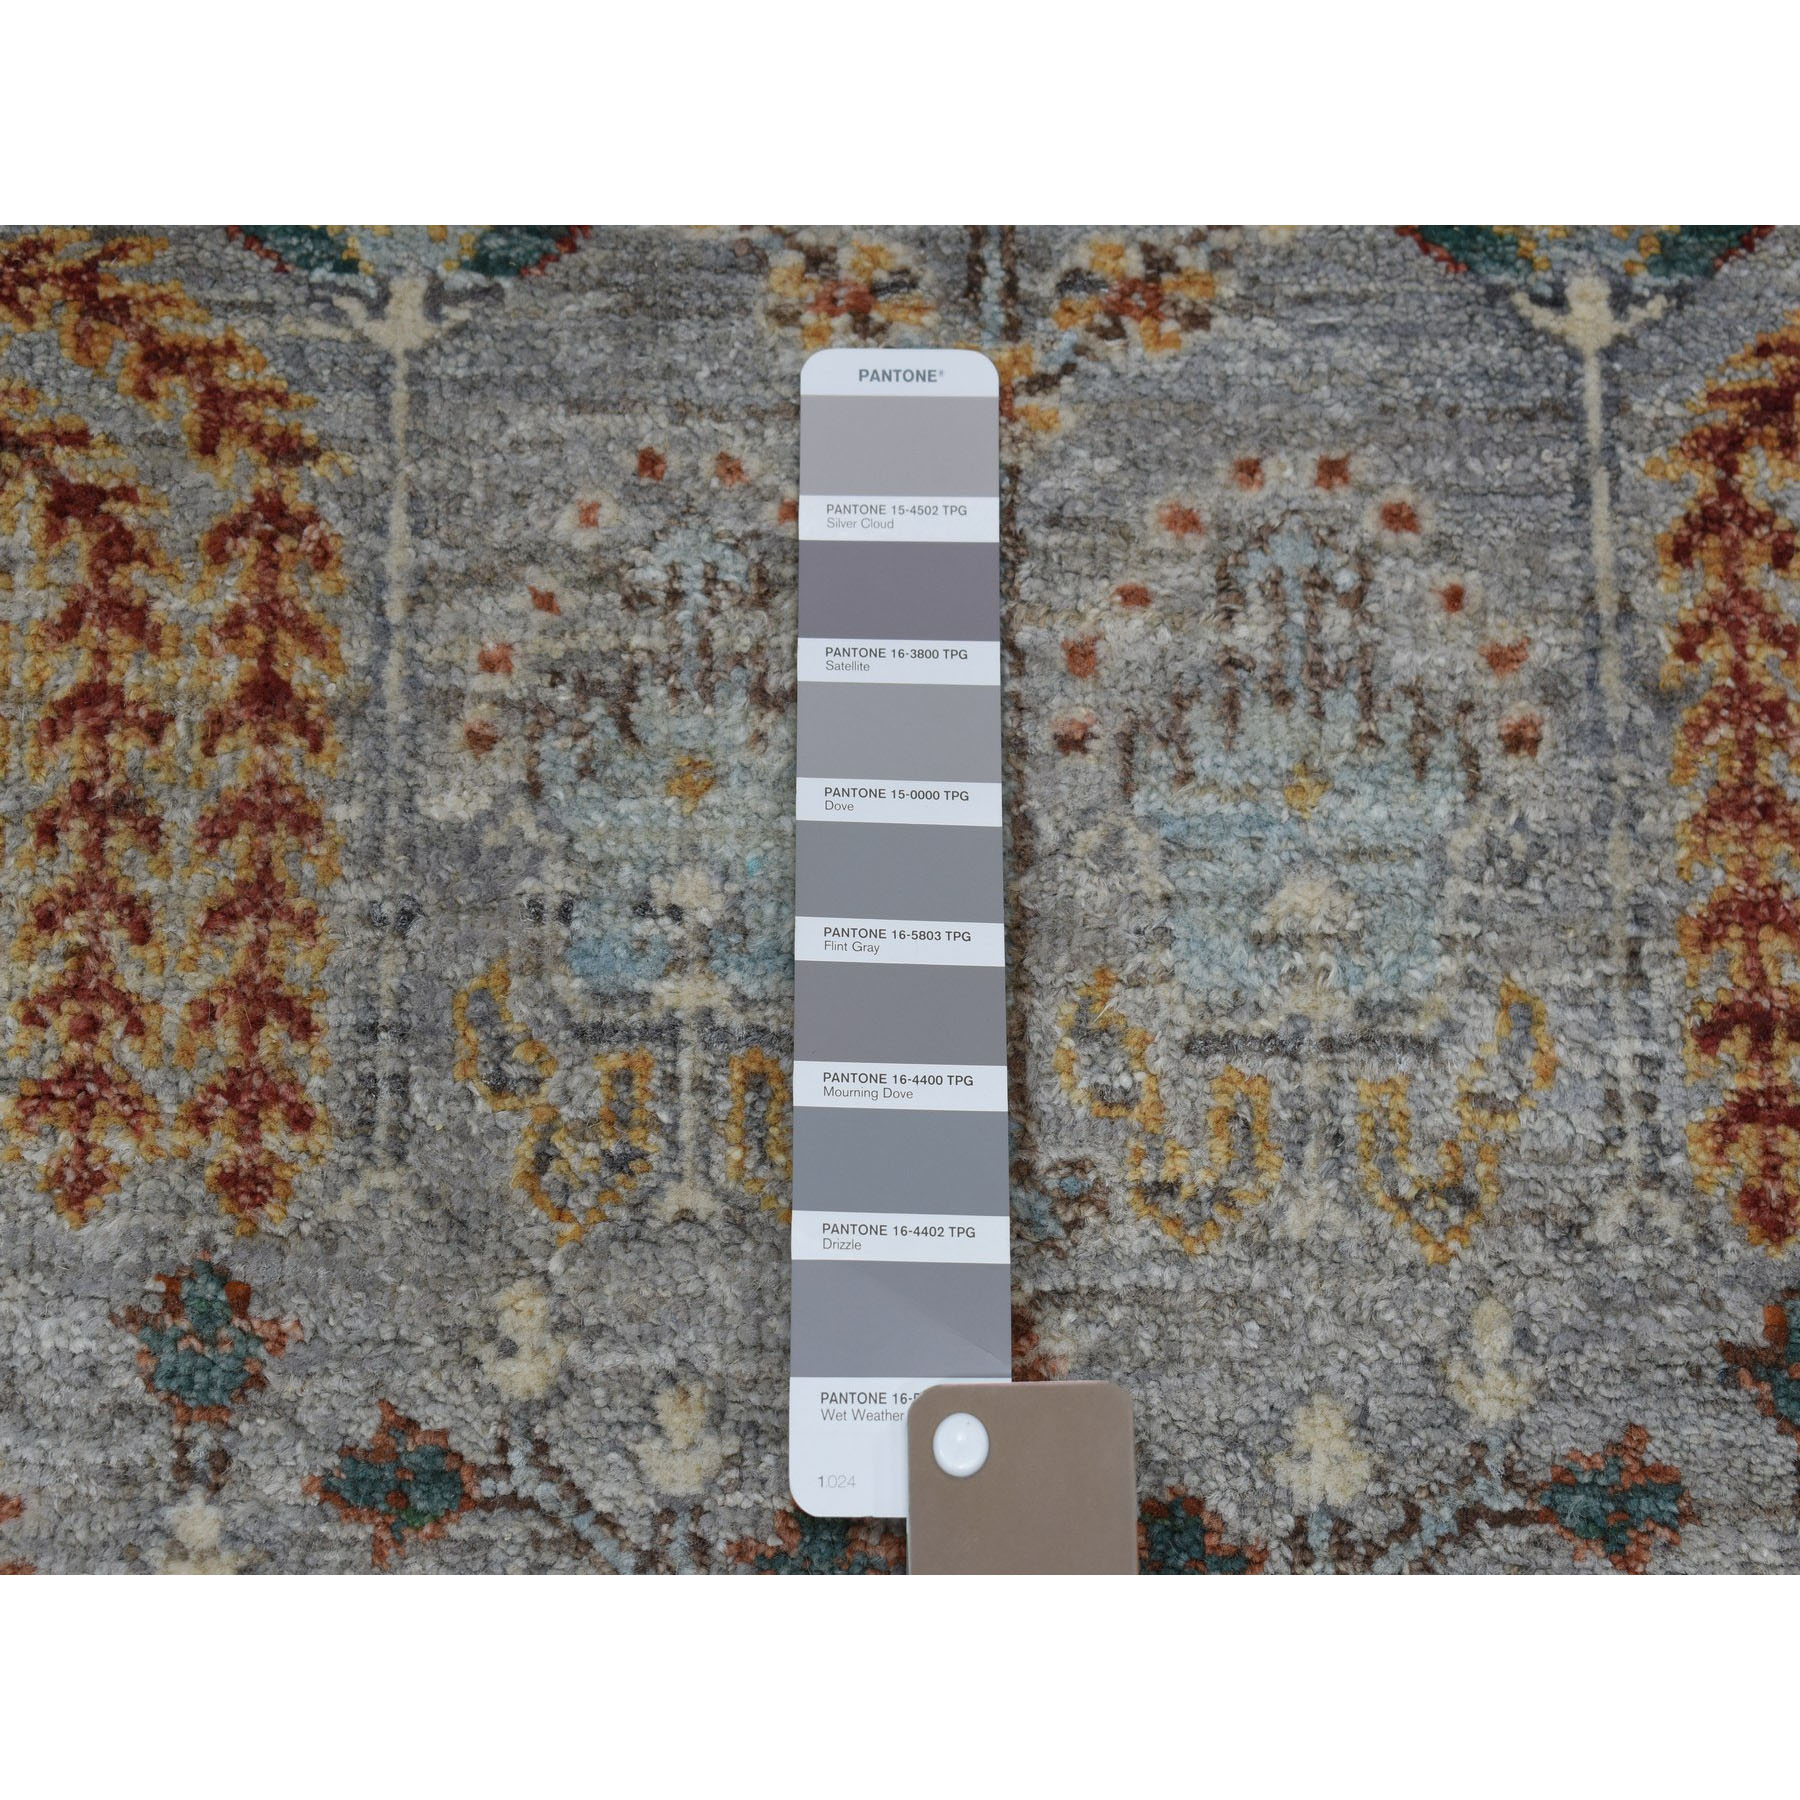 2-7 x6-1  Gray Peshawar Willow And Cypress Tree Design Hand-Knotted Oriental Runner Rug 